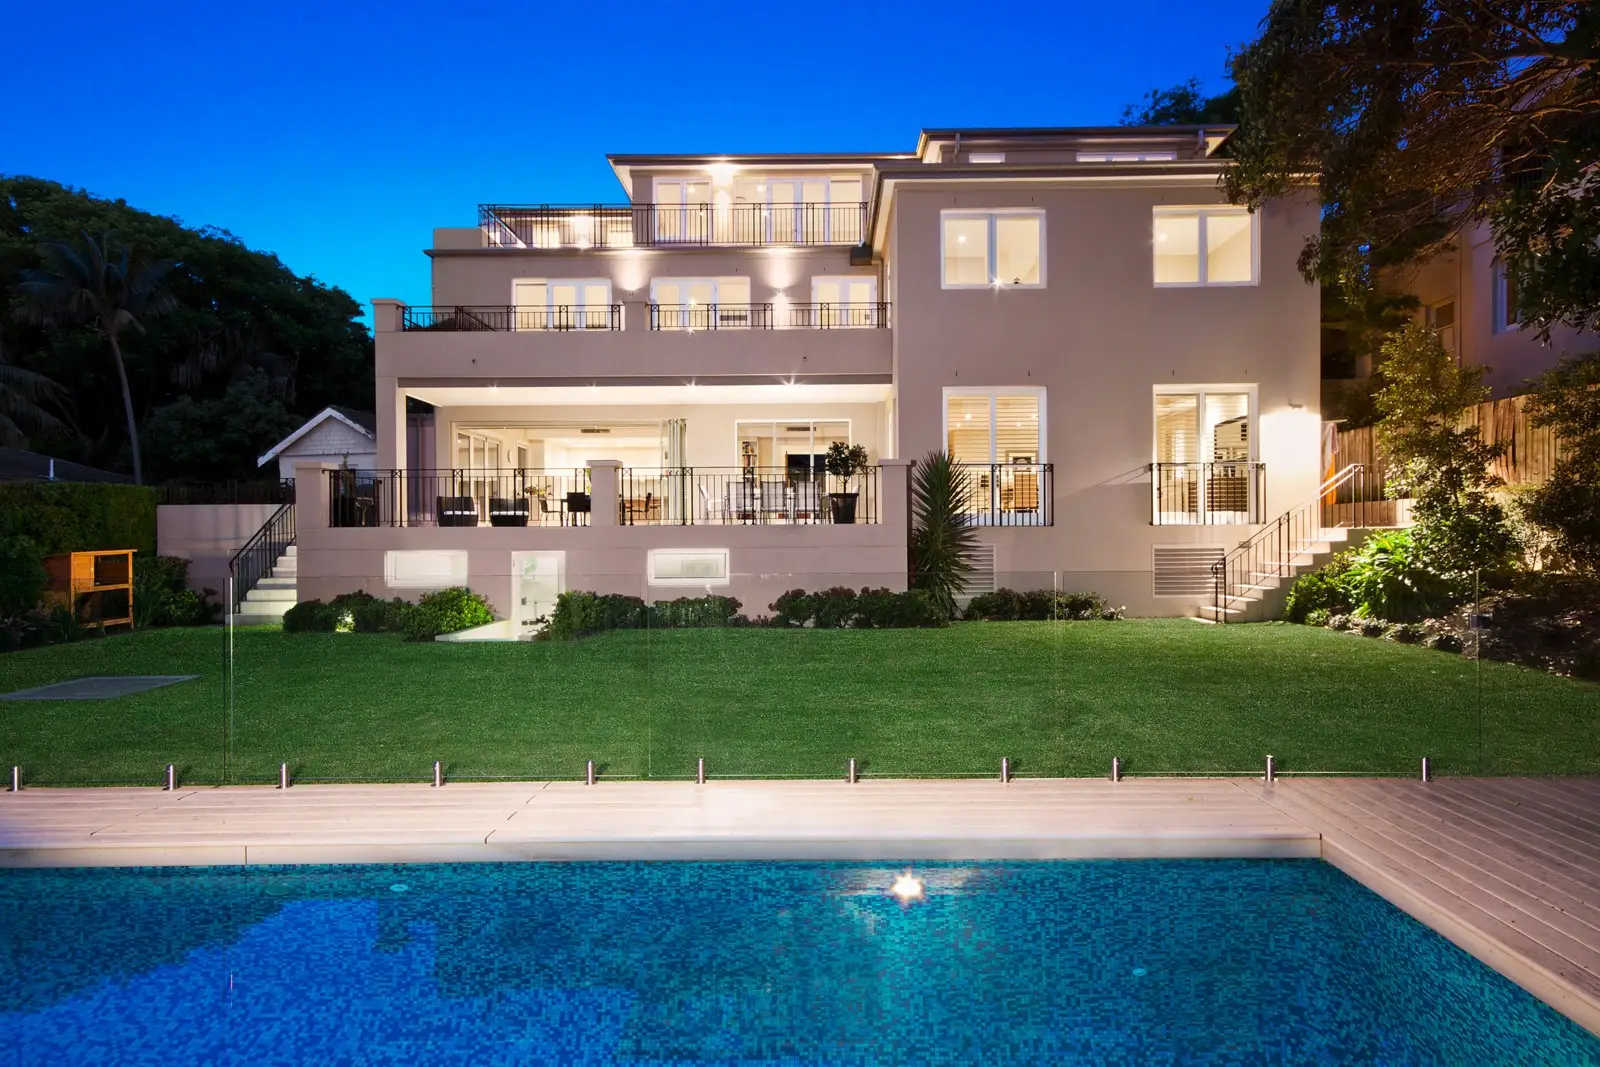 Photo #2: 22 March Street, Bellevue Hill - Sold by Sydney Sotheby's International Realty